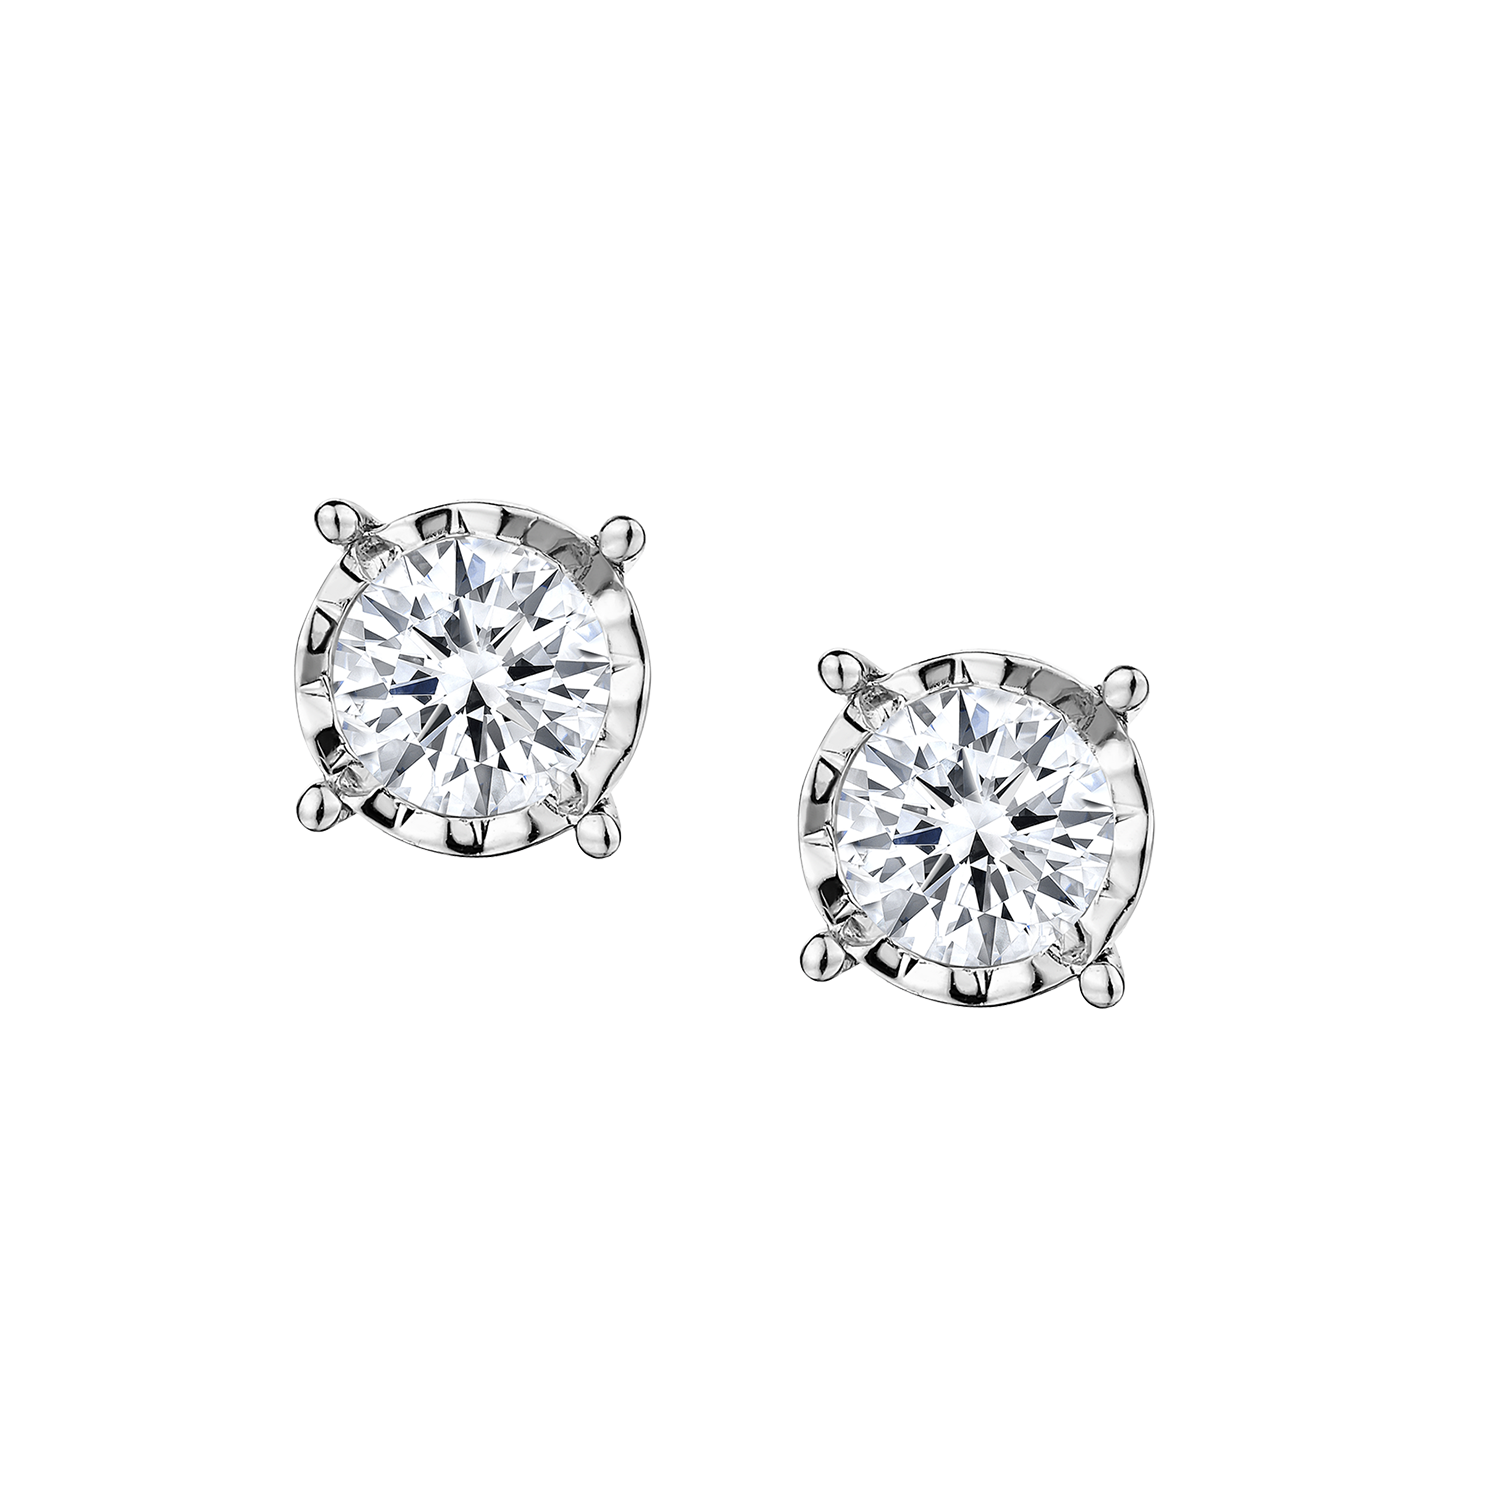 .50 Carat Diamond "Miracle" Earrings, 14kt White Gold....................NOW